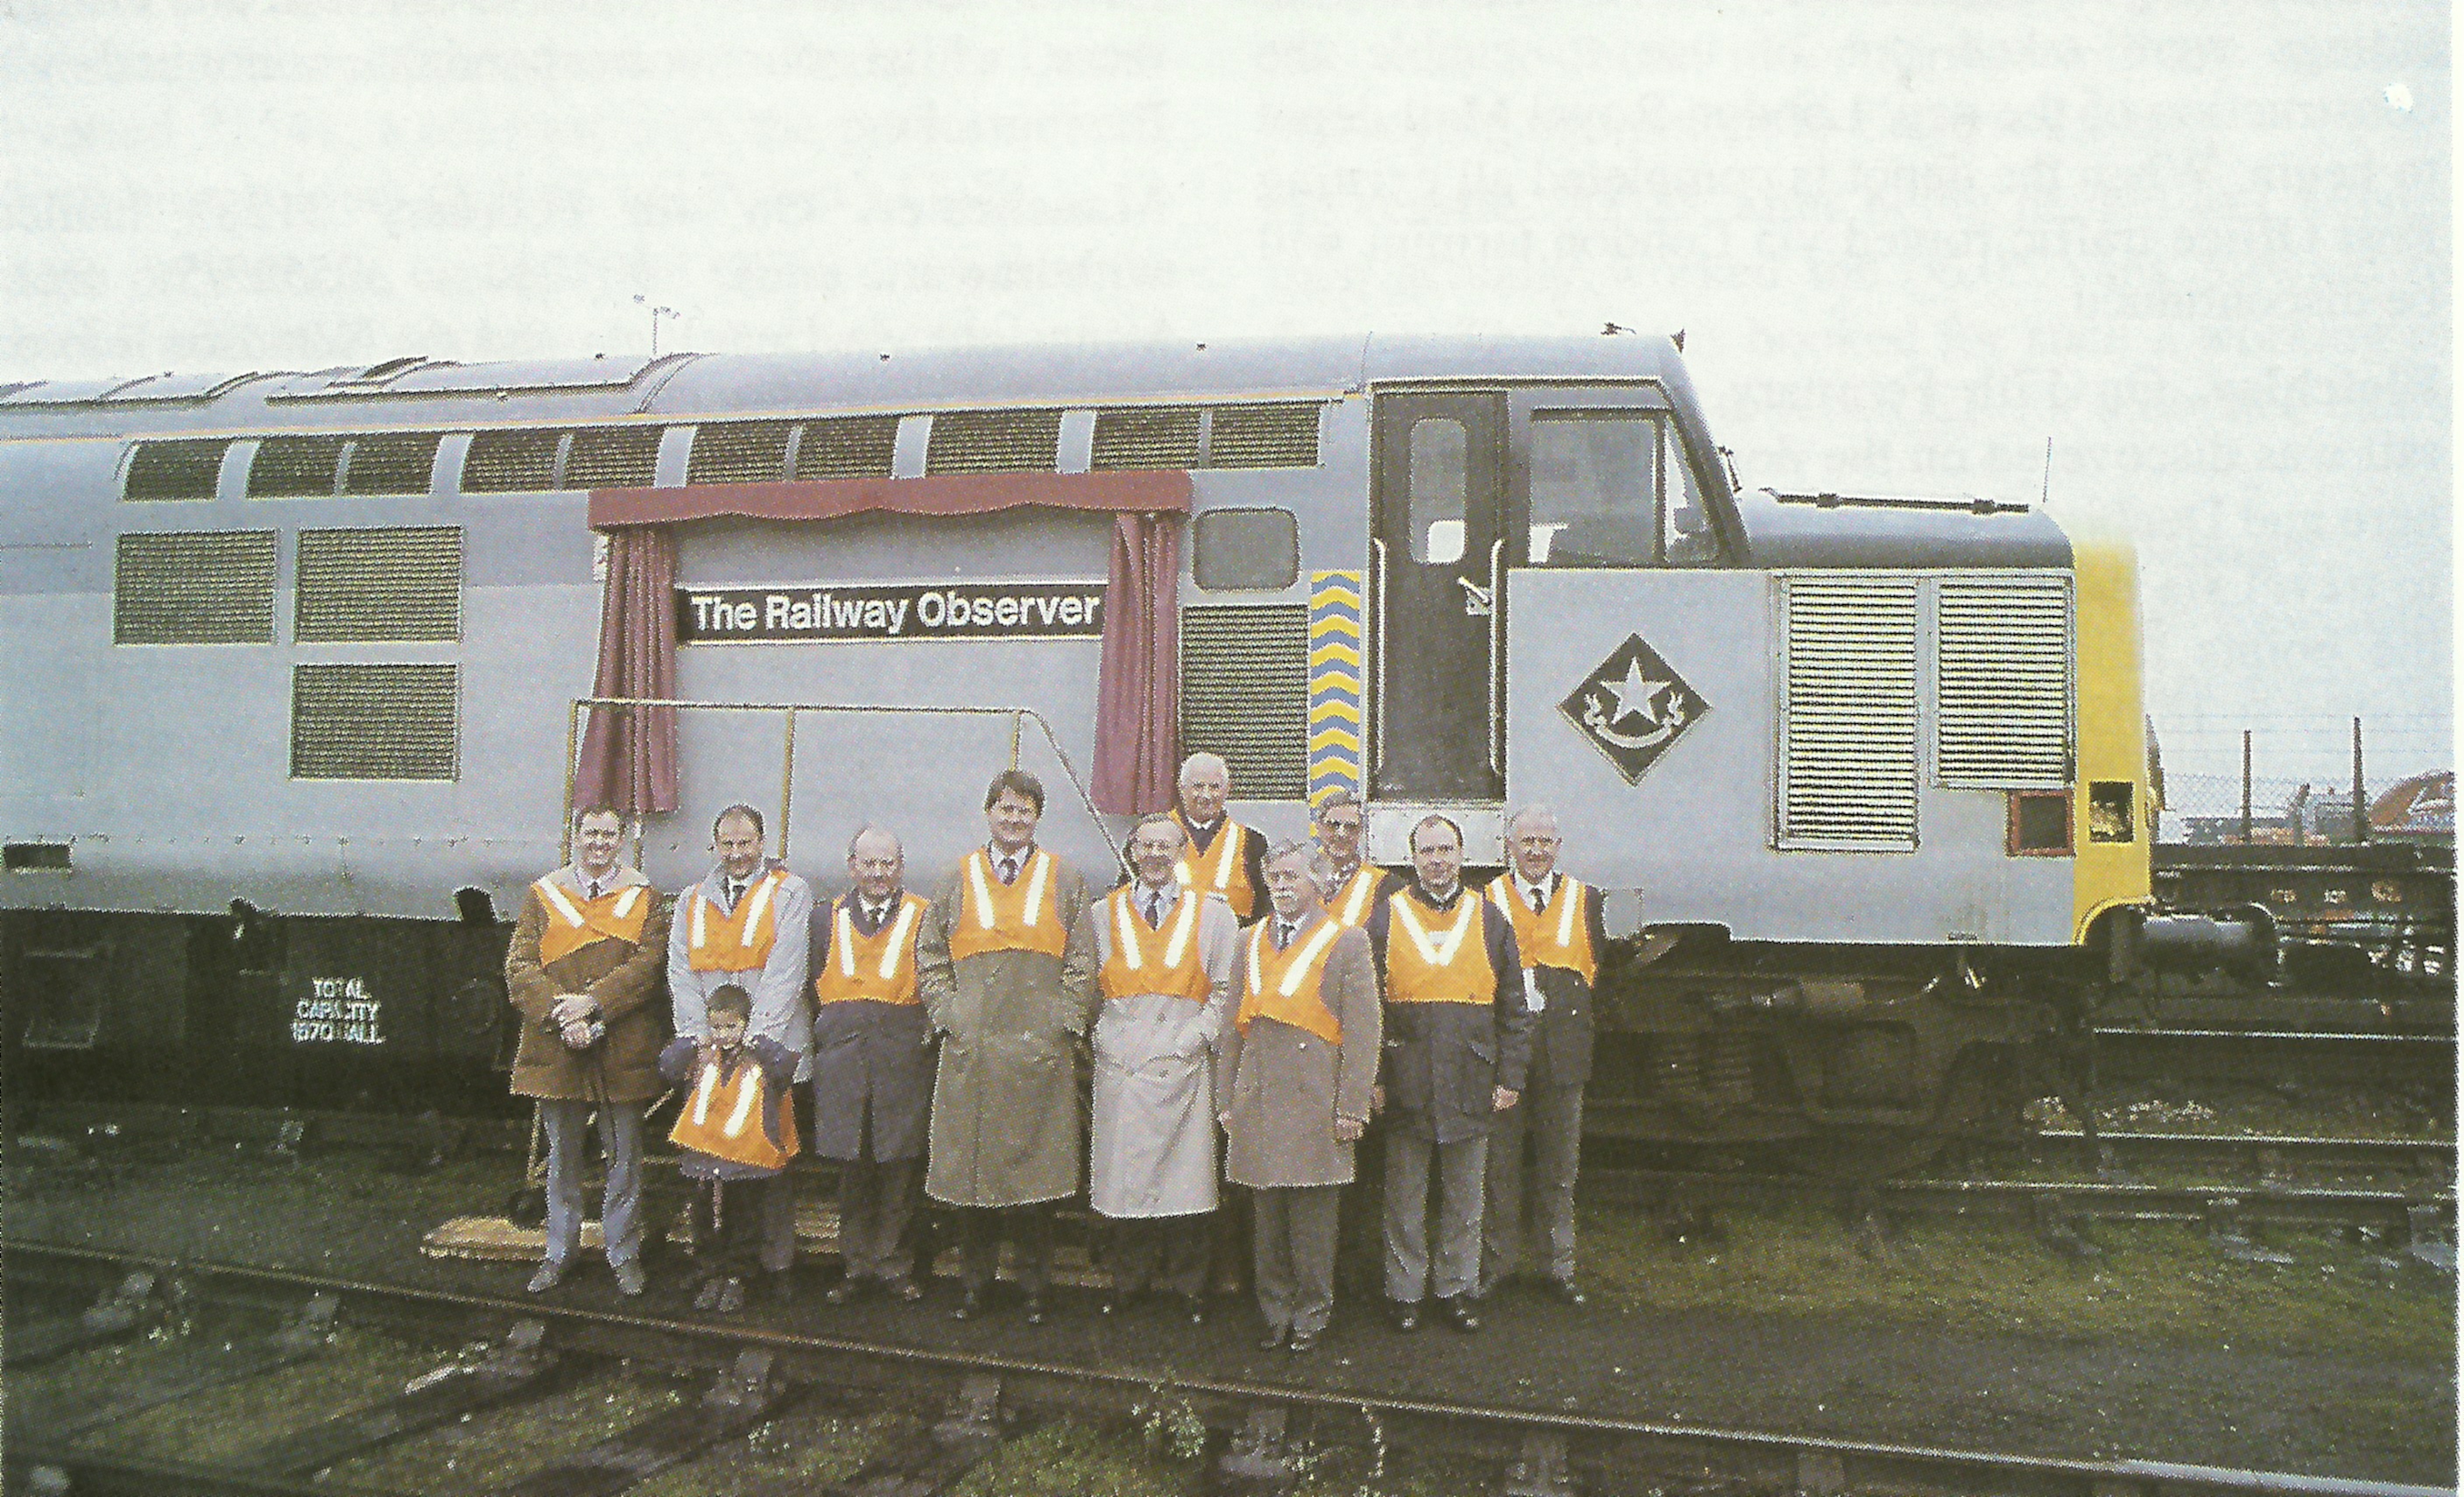 Members of the Management Committee and Society Officers stand in front of 37890 after unveiling the nameplate on 23rd February 1994. Brian Morrison

Left to Right
Reg Wood, David and Andrew Bird, Terry Silcock, John Redgate, Rodney Lissenden, John Sweet, Peter Davies, David Cole, Steve Ollive and Hugh Gould.
Courtesy Gordon Davies and John Redgate